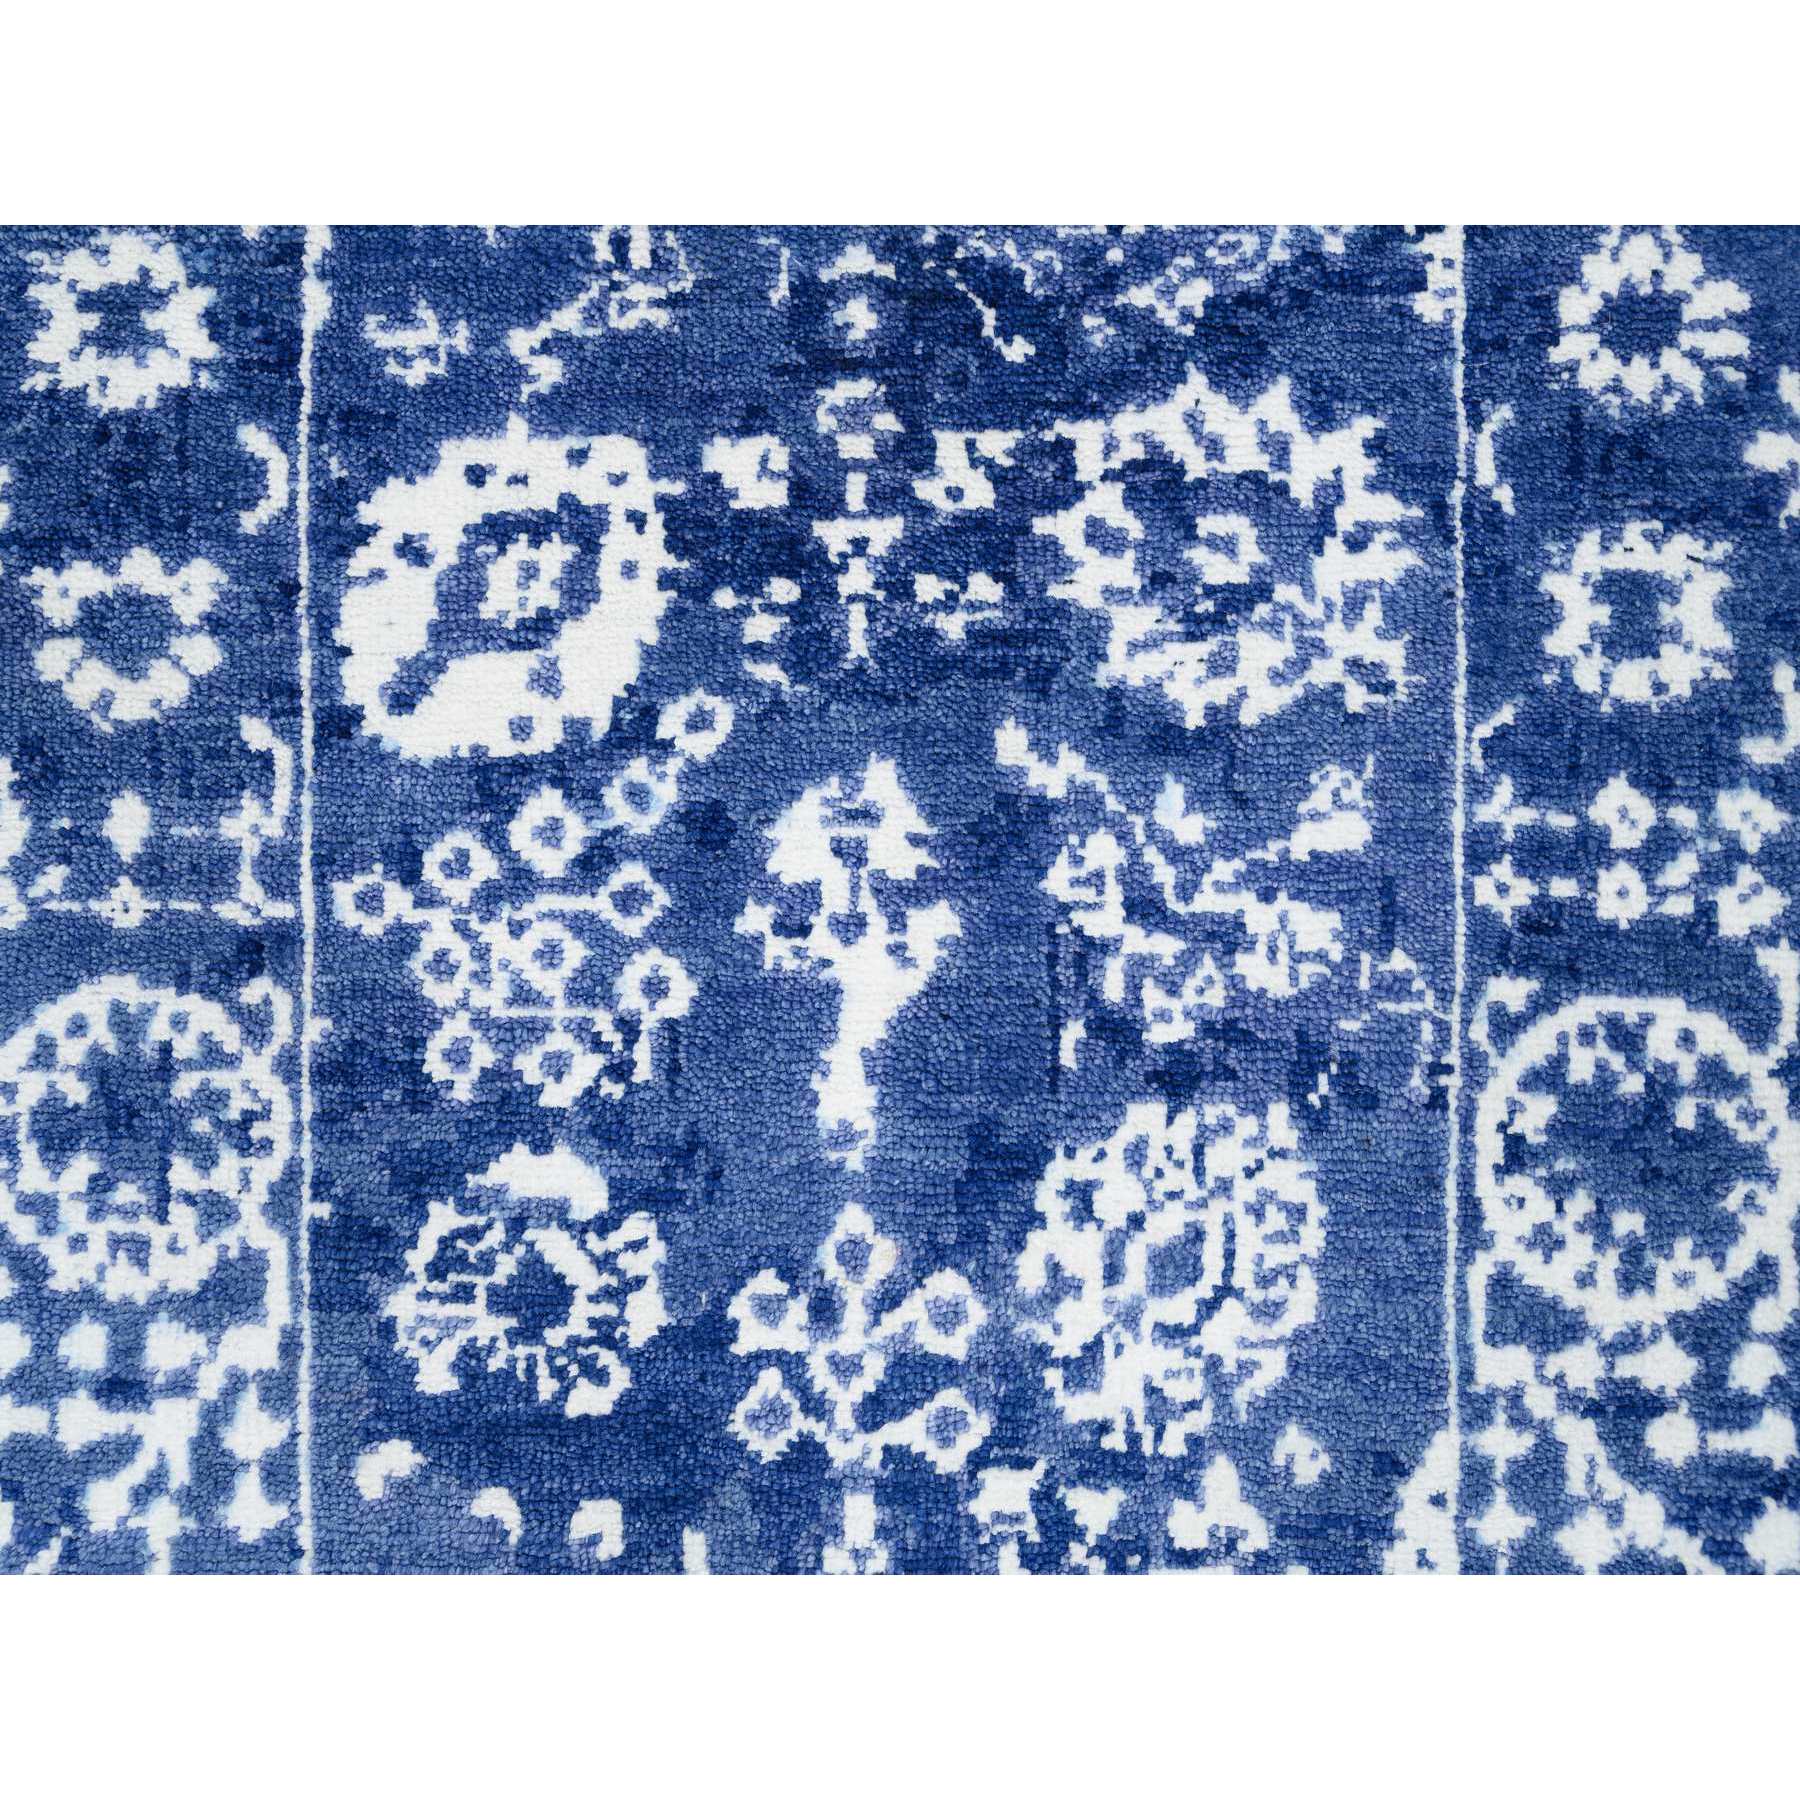 2'1"x3' Denim Blue, Tabriz with All Over Motifs Tone on Tone, Wool and Silk Hand Woven, Mat Oriental Rug 